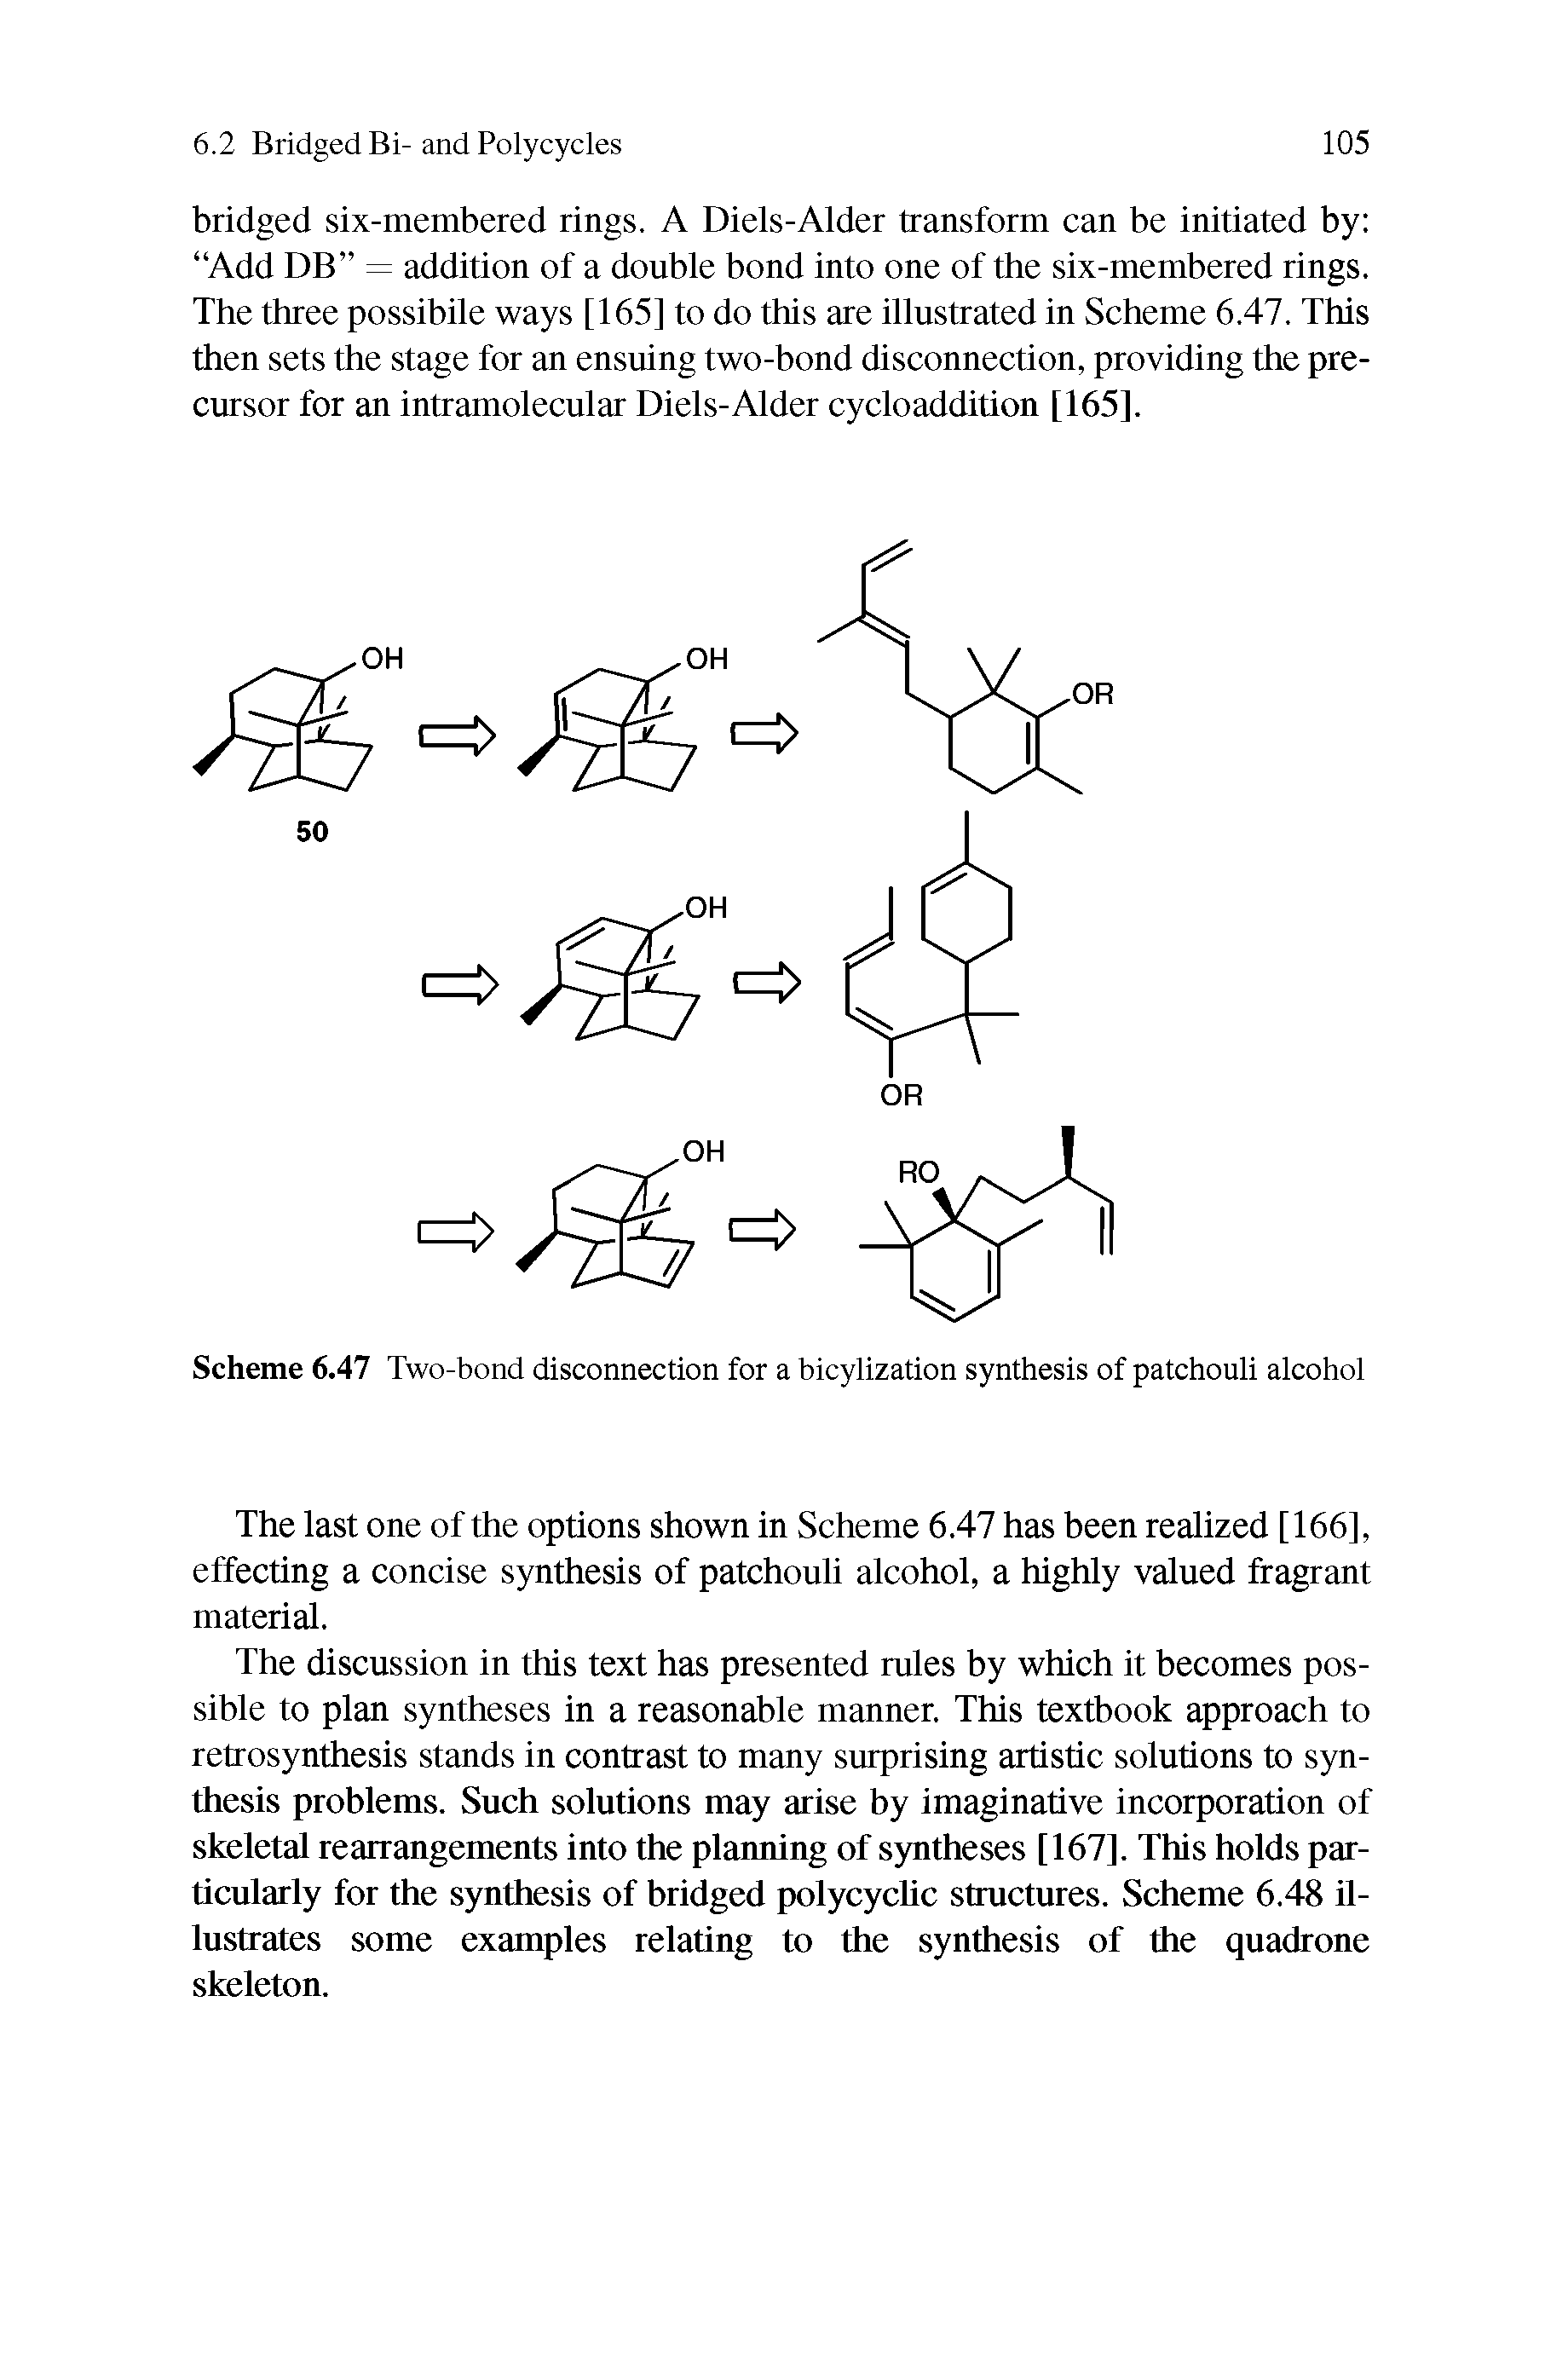 Scheme 6.47 Two-bond disconnection for a bicylization synthesis of patchouli alcohol...